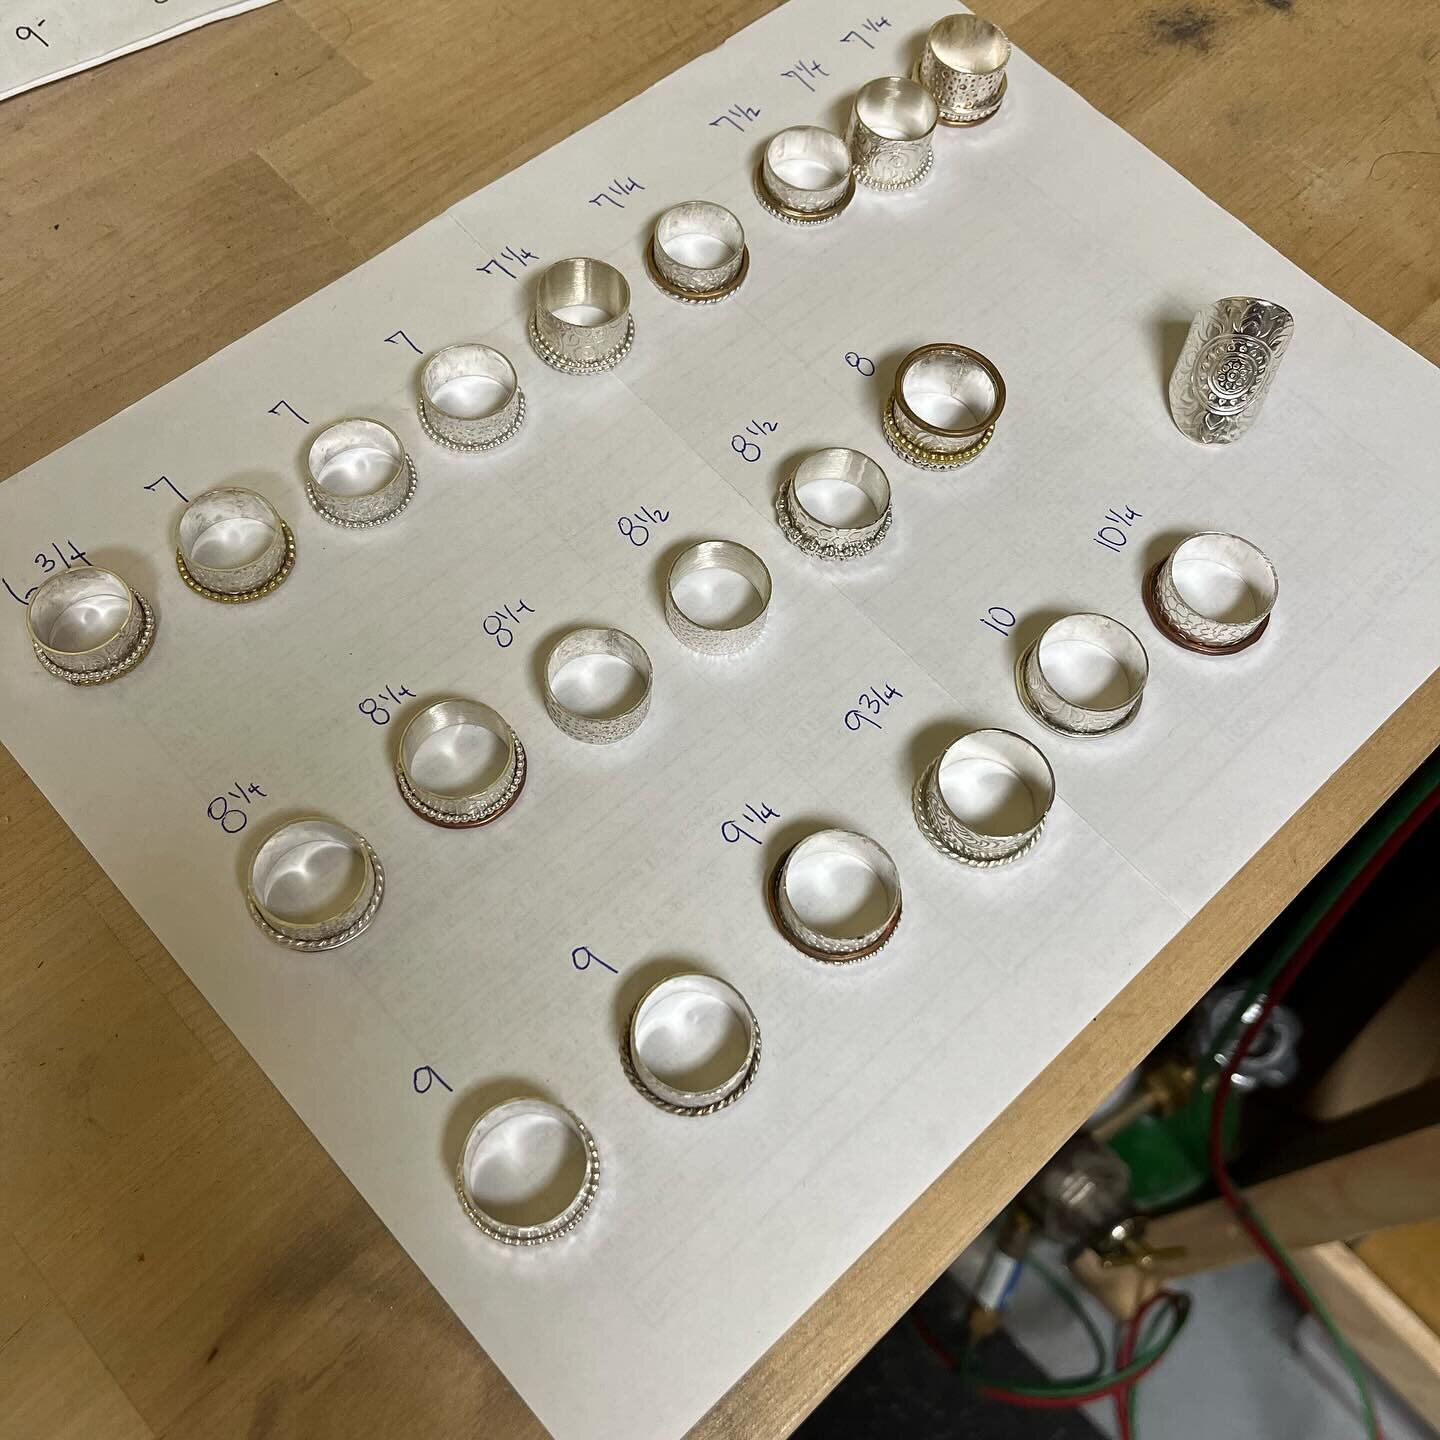 So many spinners, so much fun, I have a size for everyone 🤩

#mnjewelrybyjessica #sterlingsilverjewelry #sterlingsilverrings #spinnerring #fidgetring #handmadejewelry